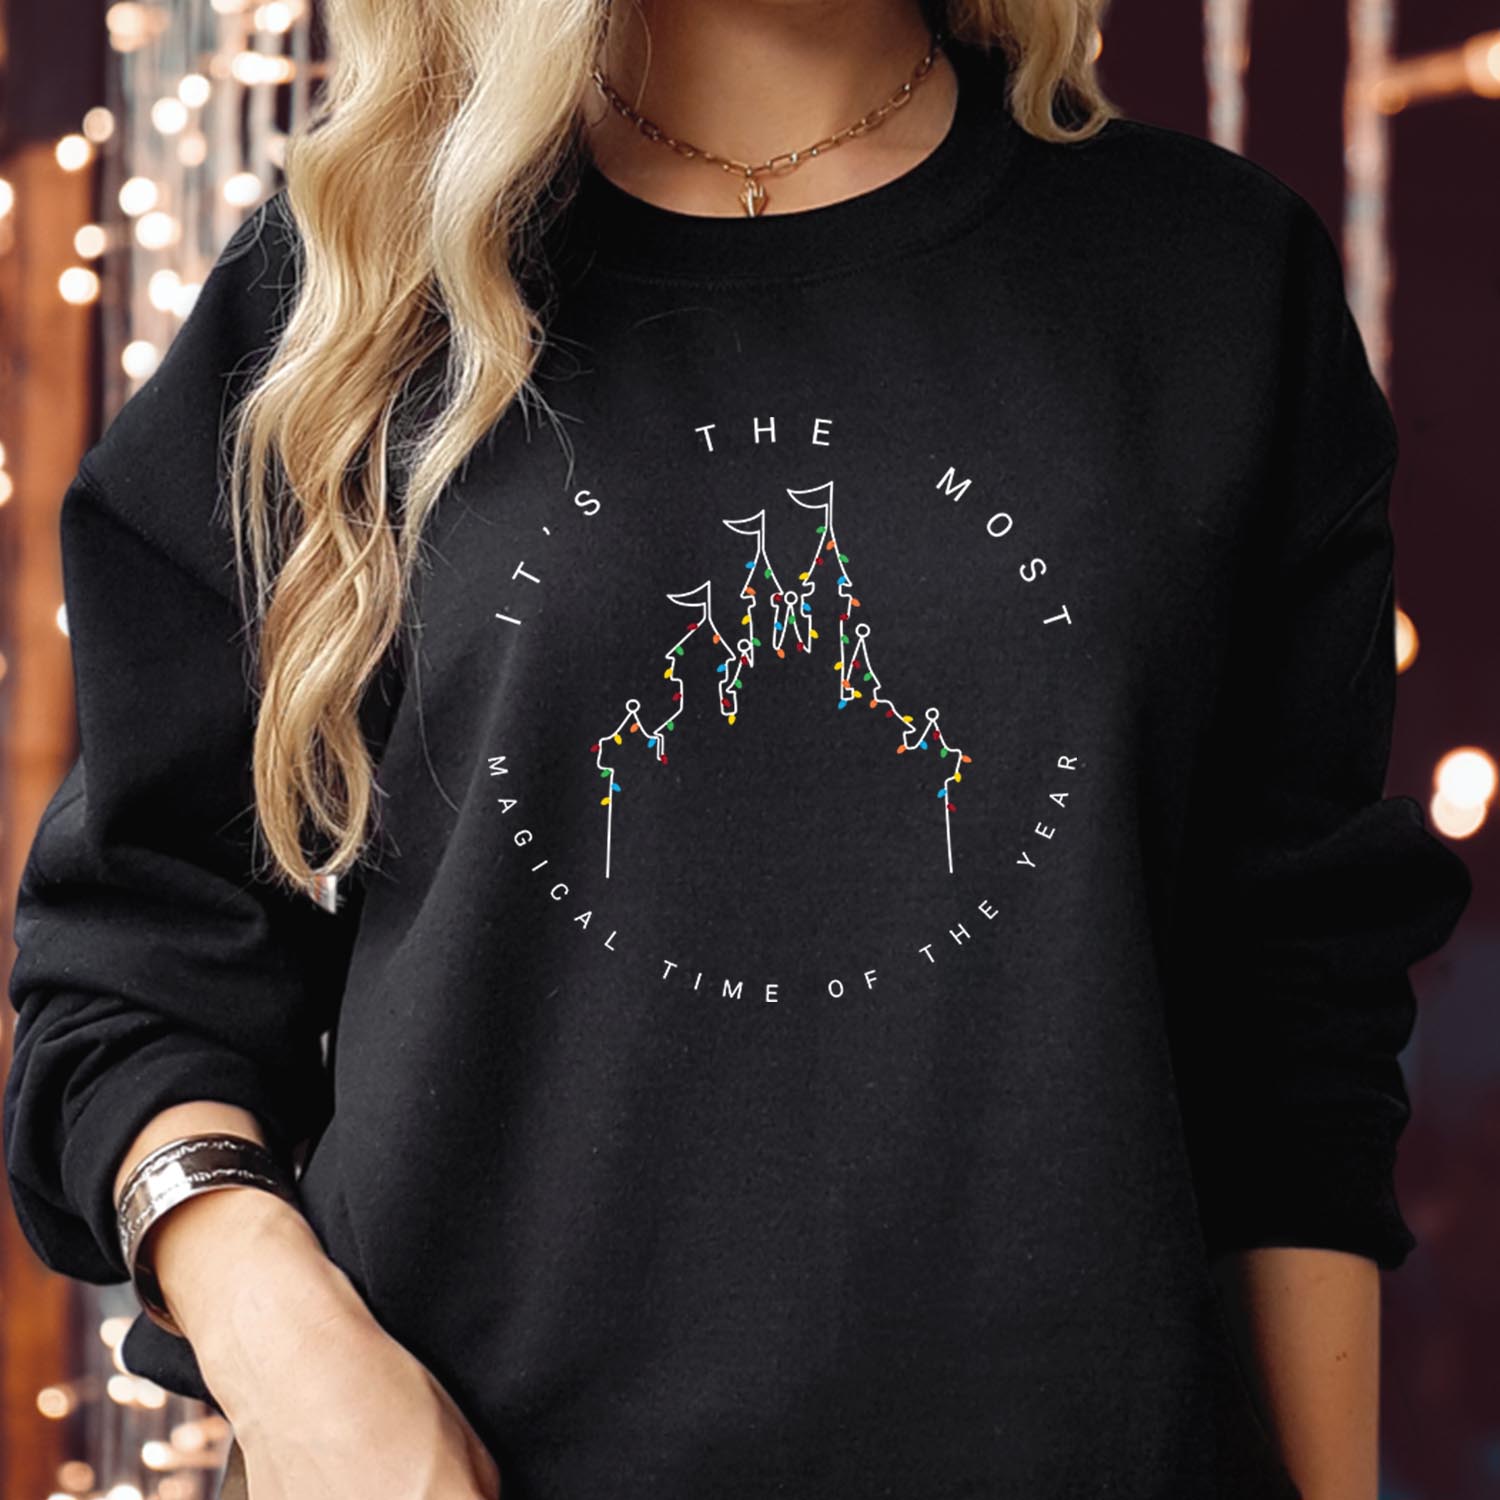 It's The Most Magical Time of the Year Sweatshirt